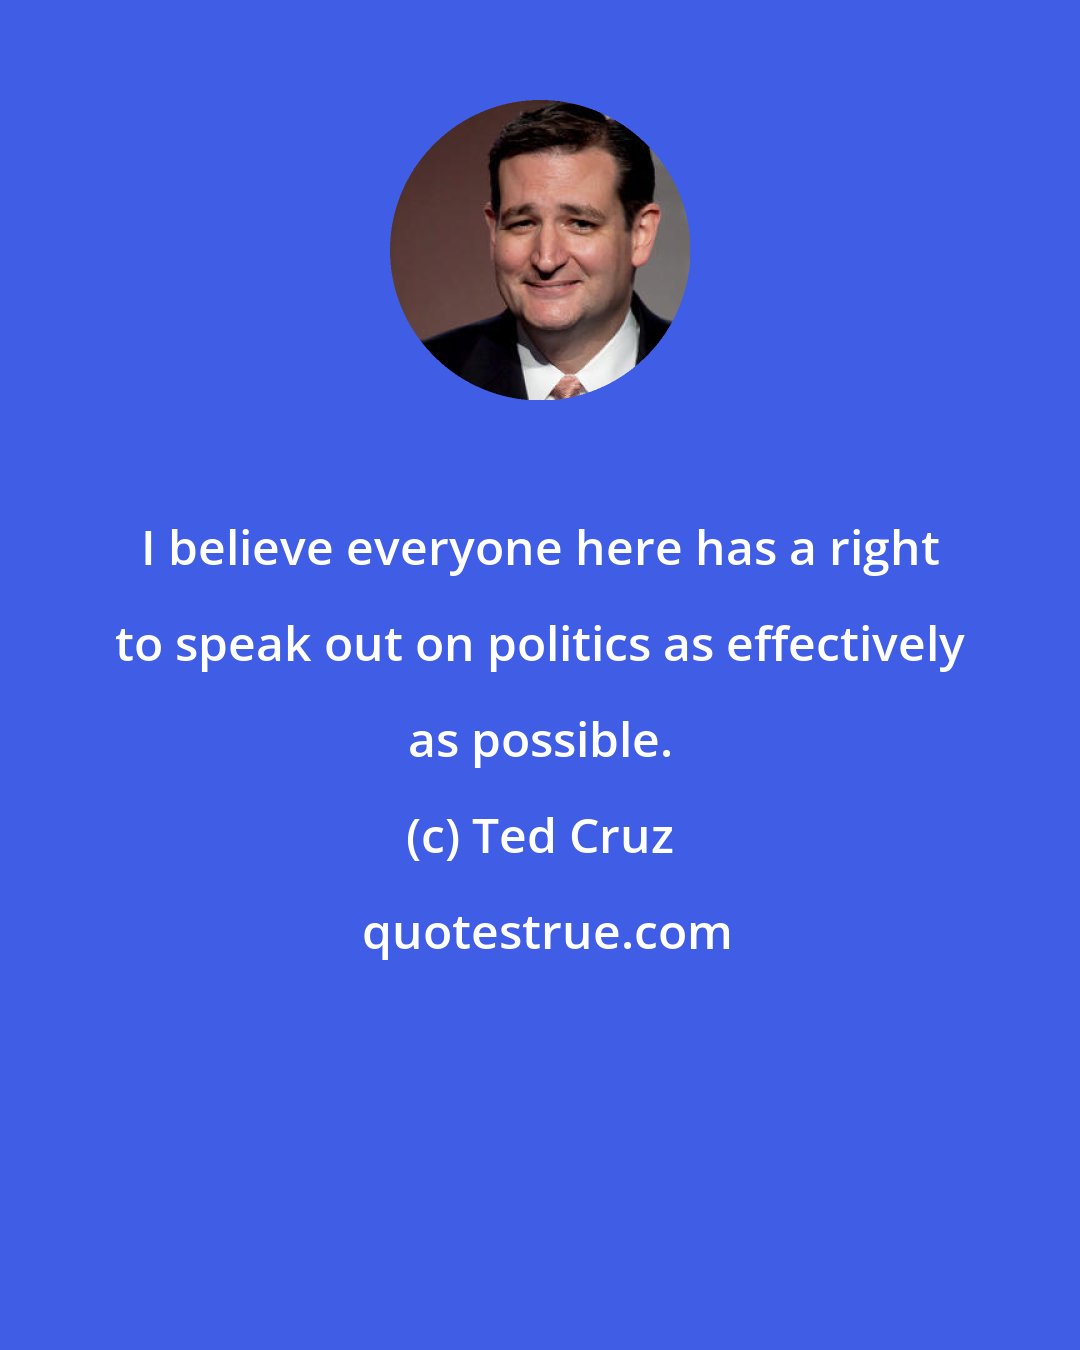 Ted Cruz: I believe everyone here has a right to speak out on politics as effectively as possible.